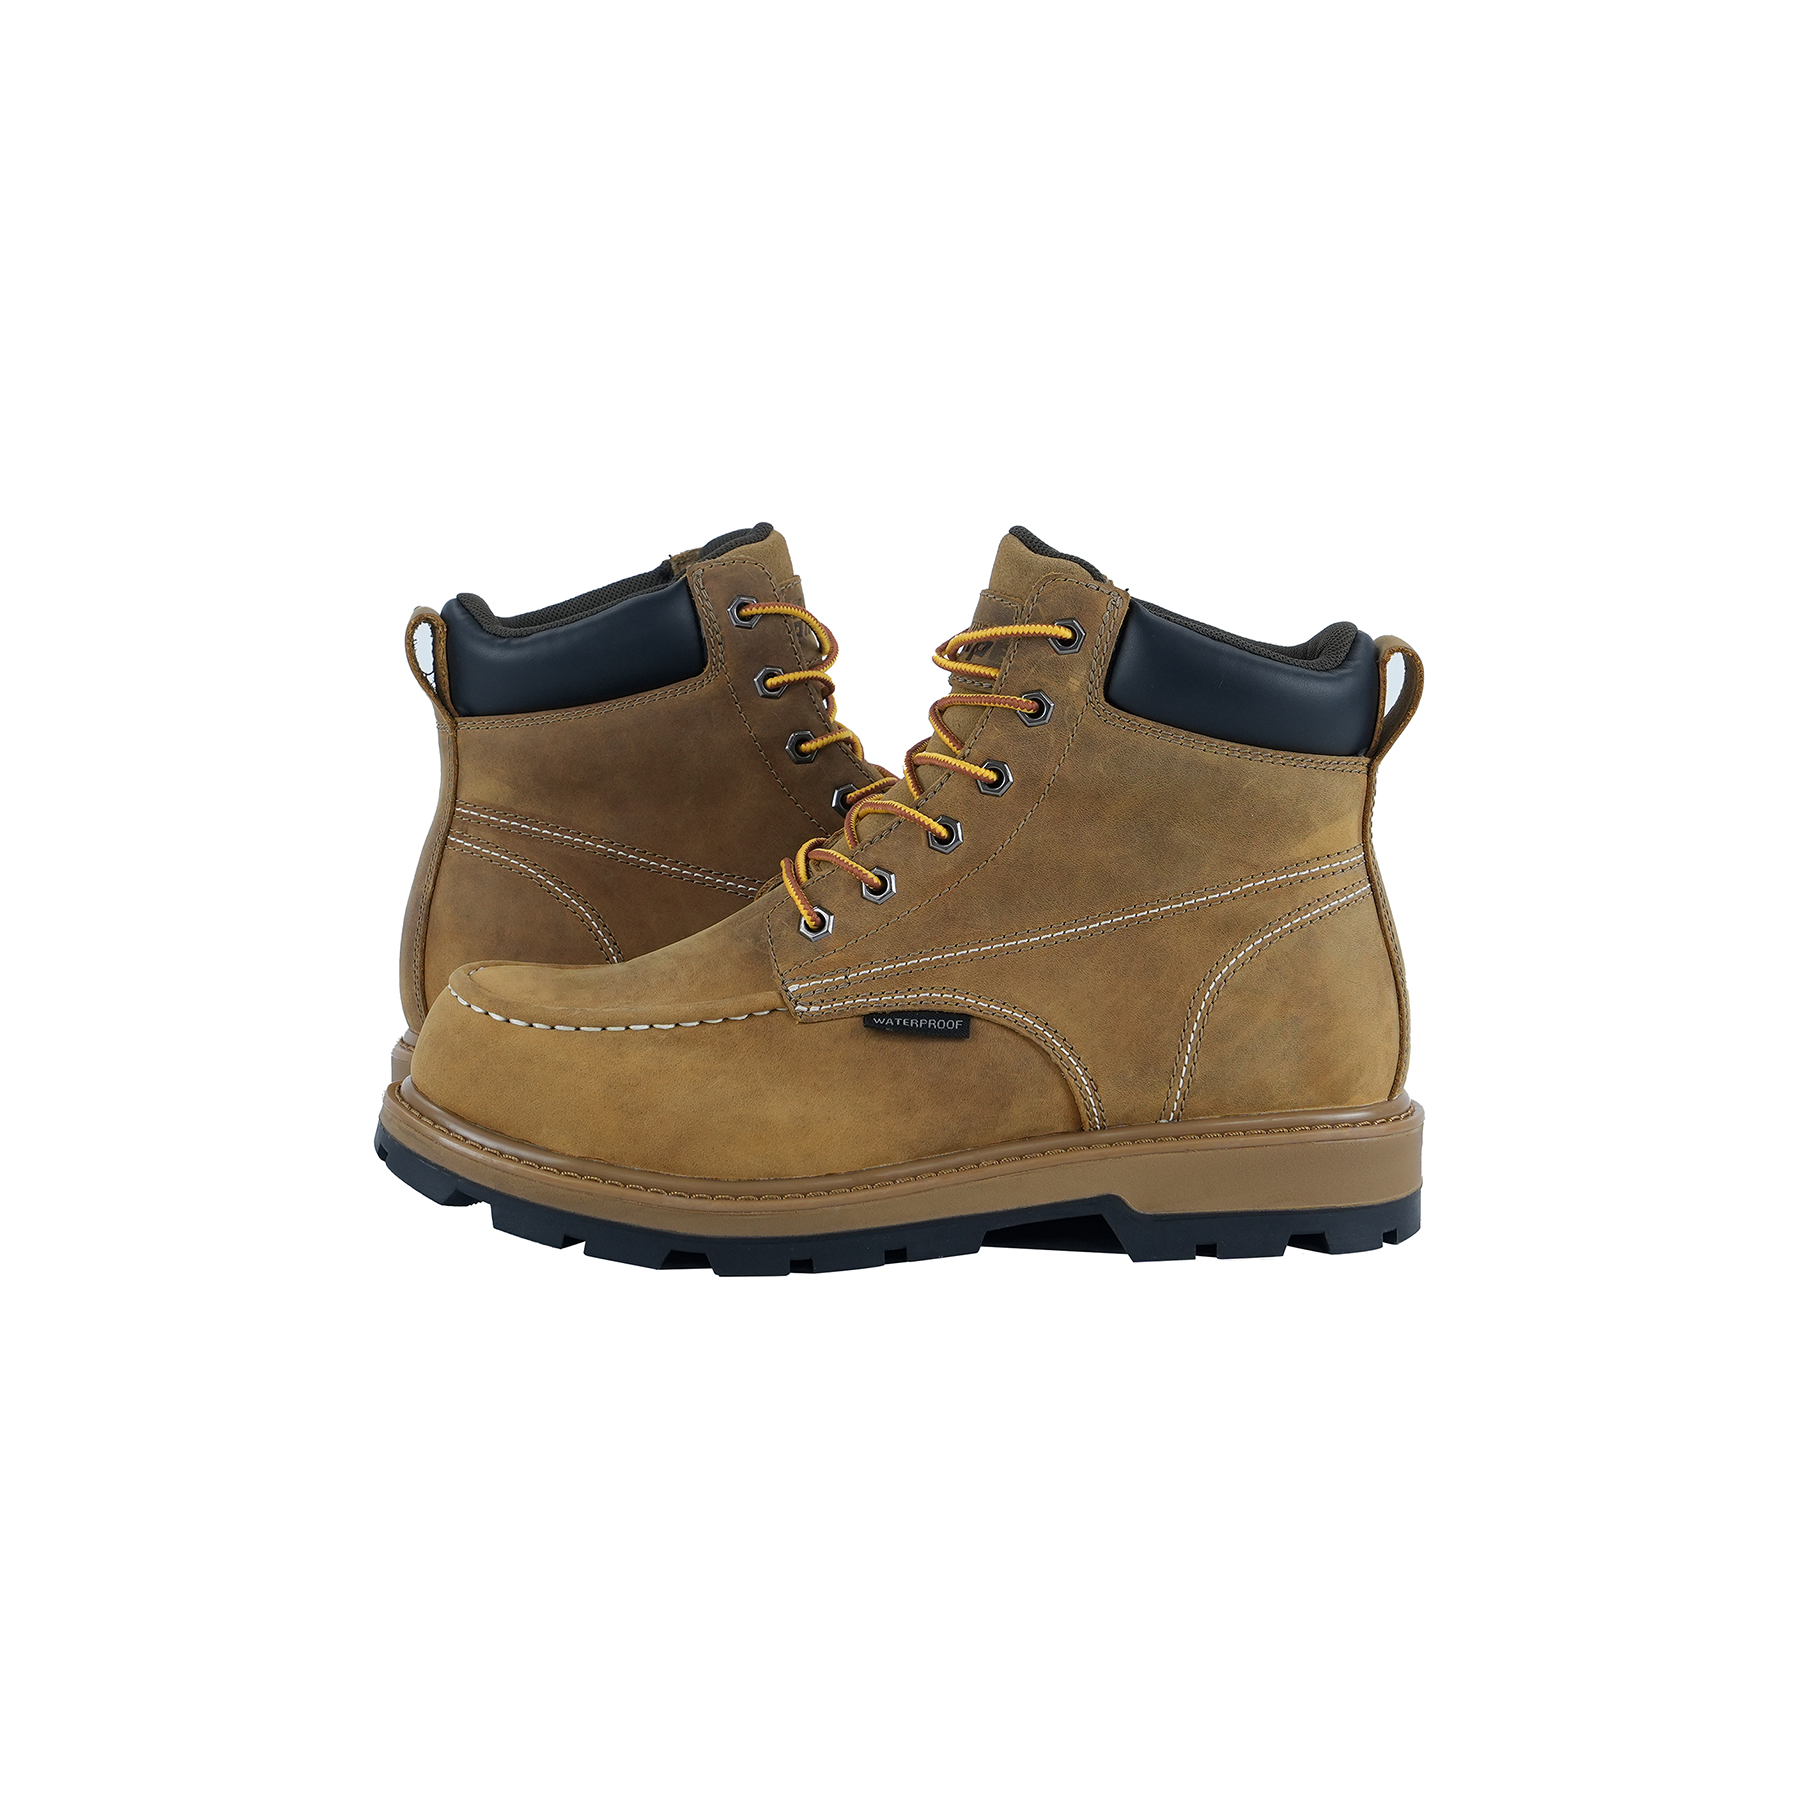 Seals Martin Shoes--Brown work shoes for man, safety boots,steel toe boots,.